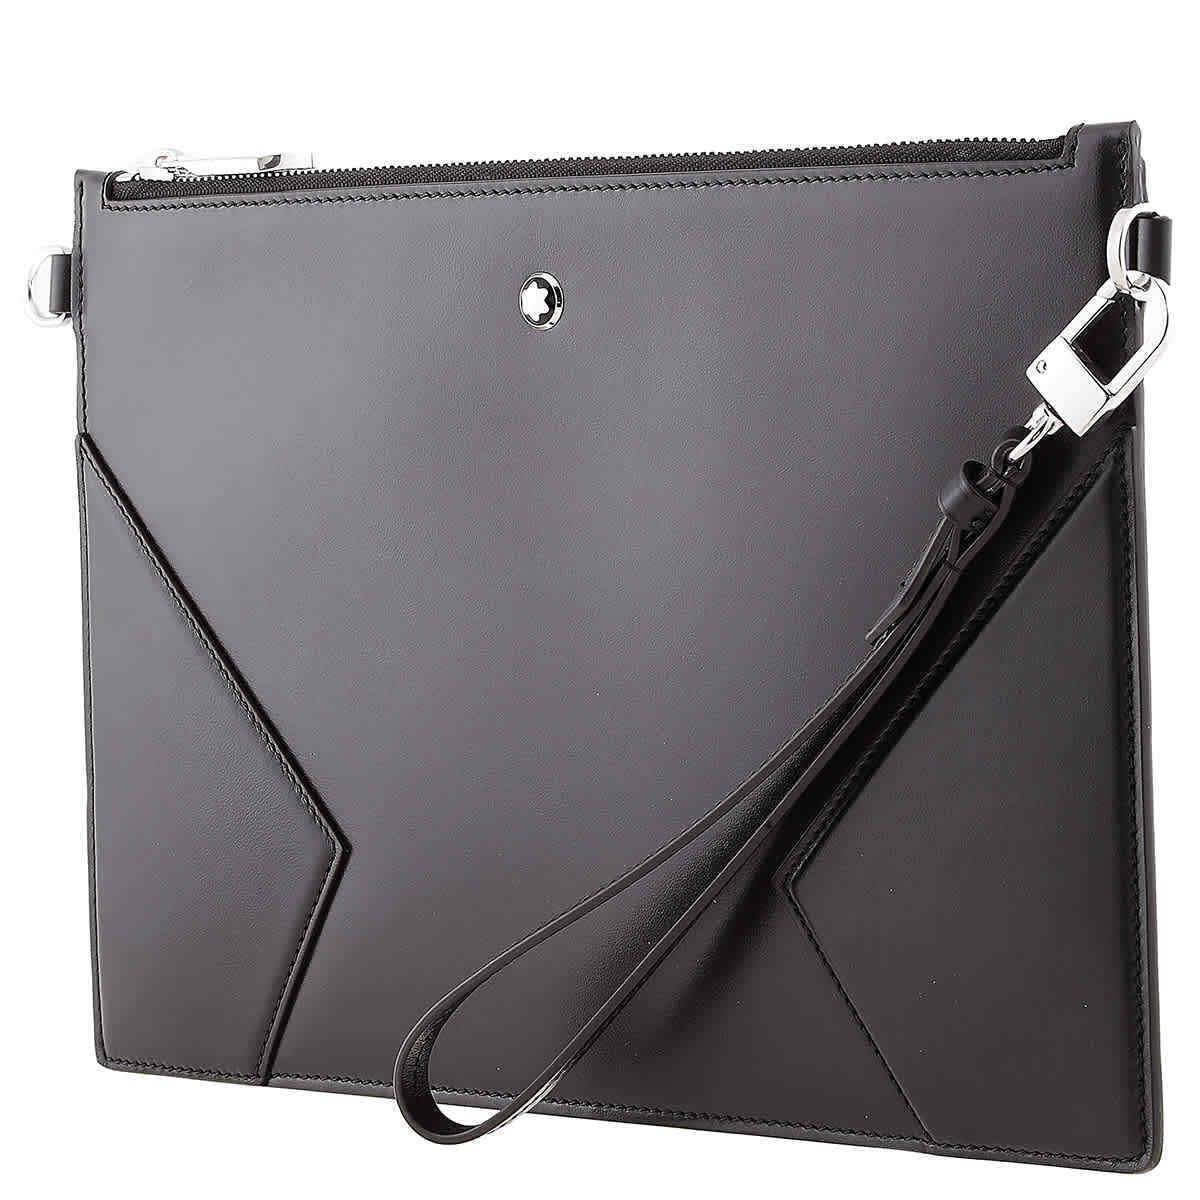 Montblanc Meisterstuck Soft Leather Pouch - Black 129899